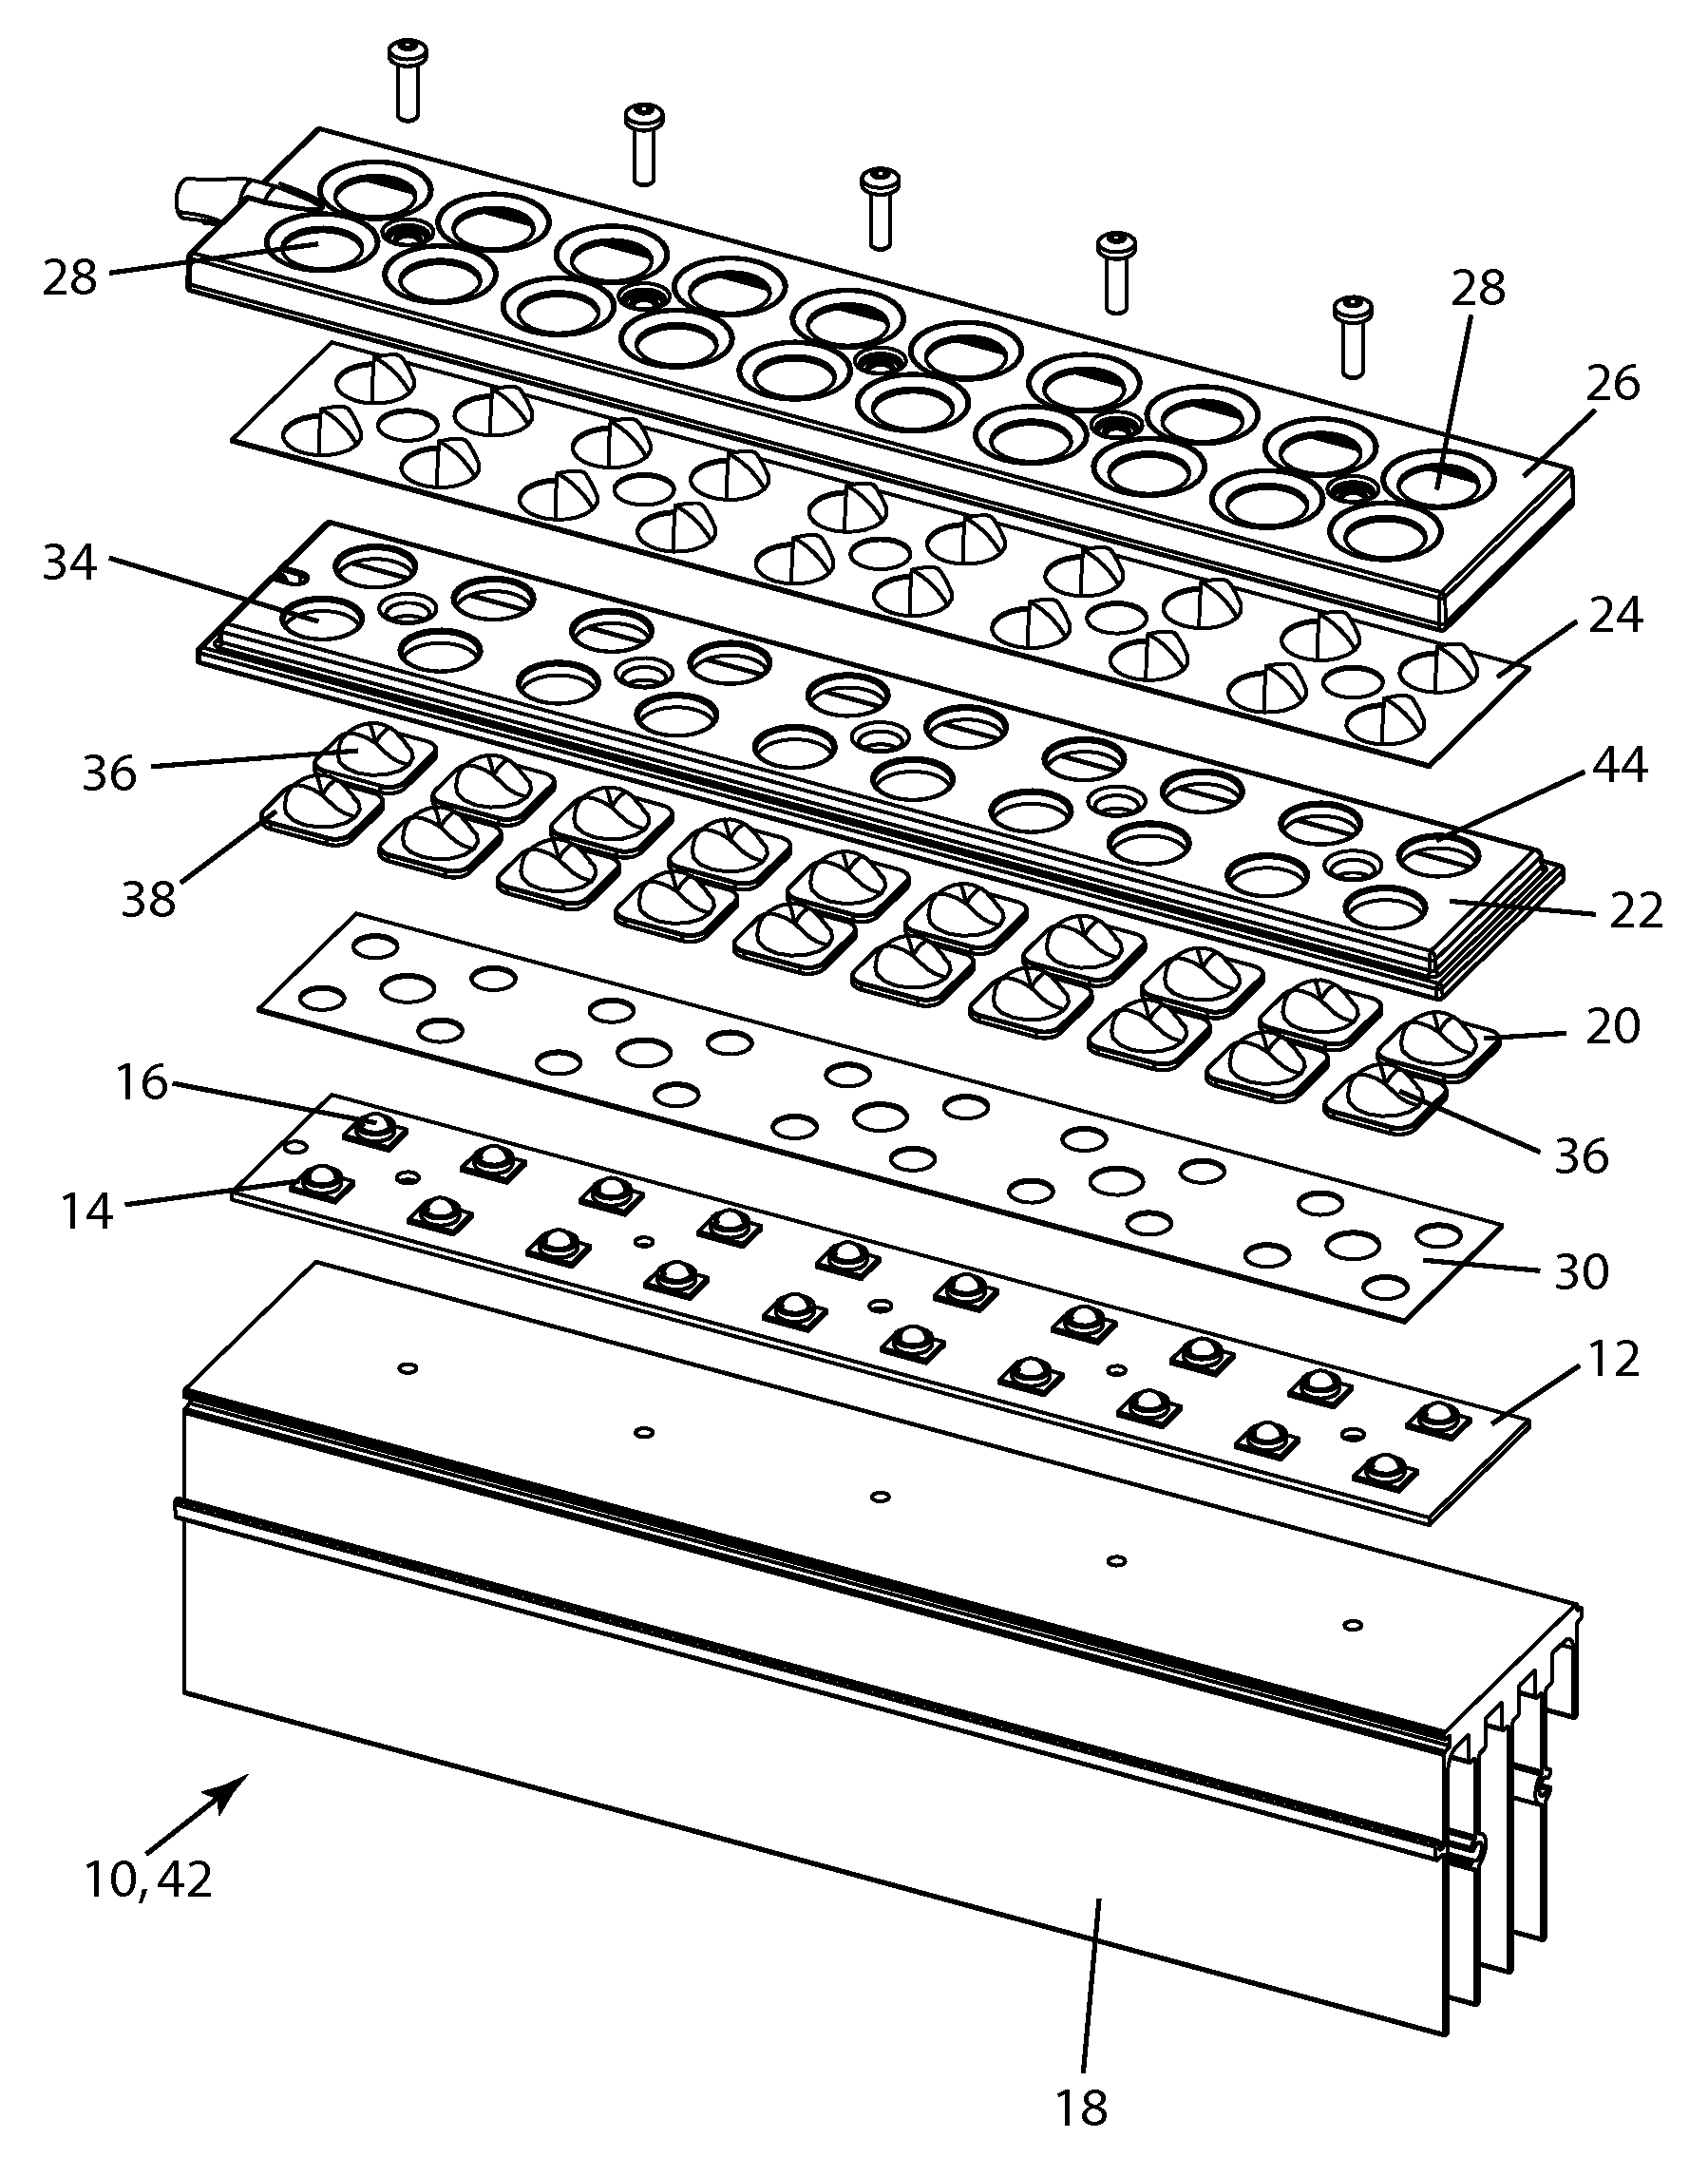 Safety accommodation arrangement in LED package/lens structure